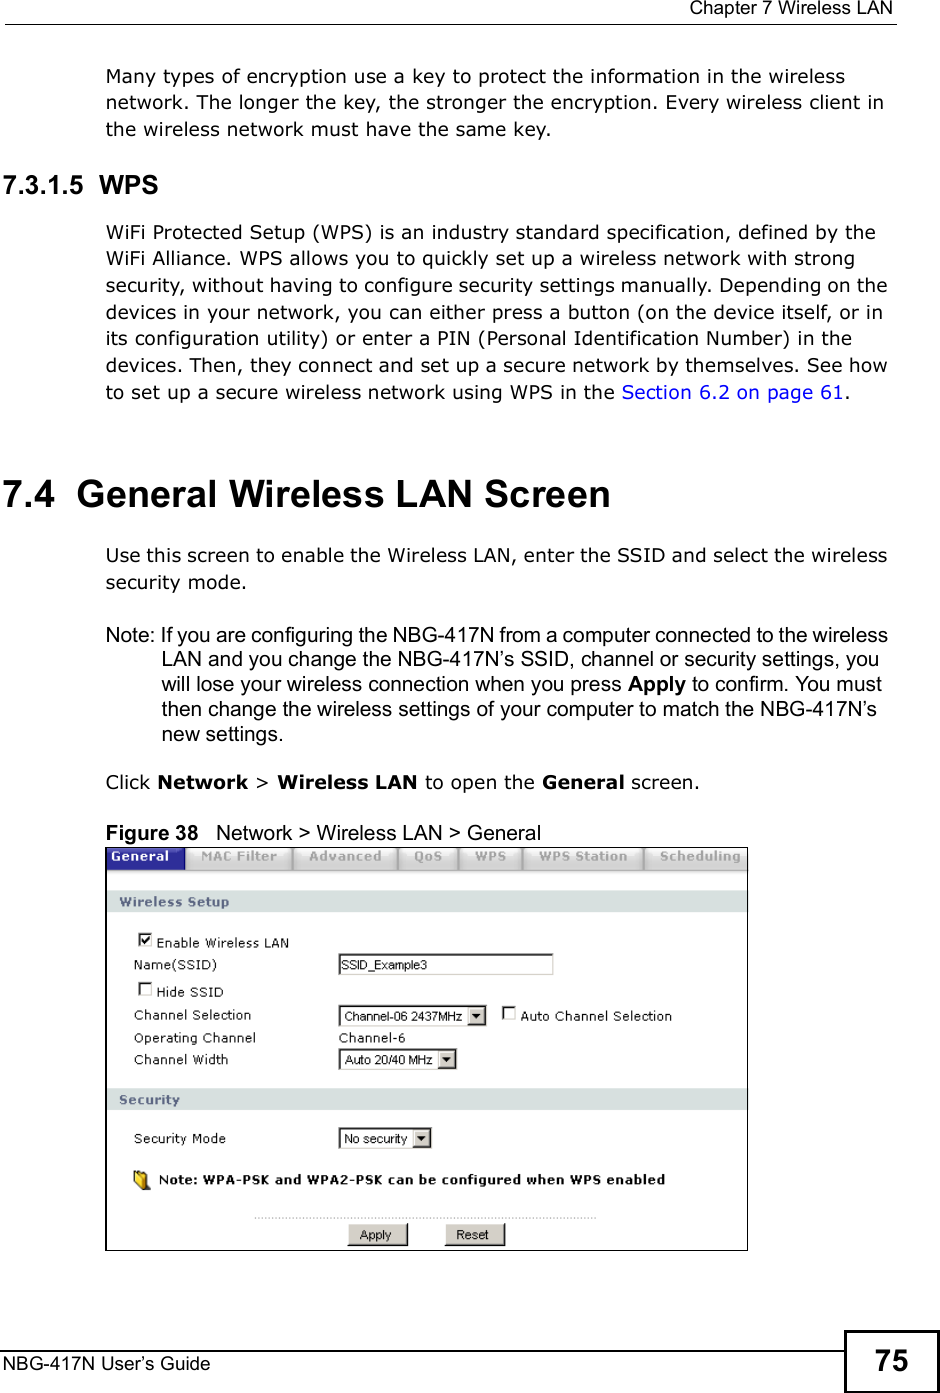  Chapter 7Wireless LANNBG-417N User s Guide 75Many types of encryption use a key to protect the information in the wireless network. The longer the key, the stronger the encryption. Every wireless client in the wireless network must have the same key.7.3.1.5  WPSWiFi Protected Setup (WPS) is an industry standard specification, defined by the WiFi Alliance. WPS allows you to quickly set up a wireless network with strong security, without having to configure security settings manually. Depending on the devices in your network, you can either press a button (on the device itself, or in its configuration utility) or enter a PIN (Personal Identification Number) in the devices. Then, they connect and set up a secure network by themselves. See how to set up a secure wireless network using WPS in the Section 6.2 on page 61.  7.4  General Wireless LAN Screen Use this screen to enable the Wireless LAN, enter the SSID and select the wireless security mode.Note: If you are configuring the NBG-417N from a computer connected to the wireless LAN and you change the NBG-417N s SSID, channel or security settings, you will lose your wireless connection when you press Apply to confirm. You must then change the wireless settings of your computer to match the NBG-417N s new settings.Click Network &gt; Wireless LAN to open the General screen.Figure 38   Network &gt; Wireless LAN &gt; General 